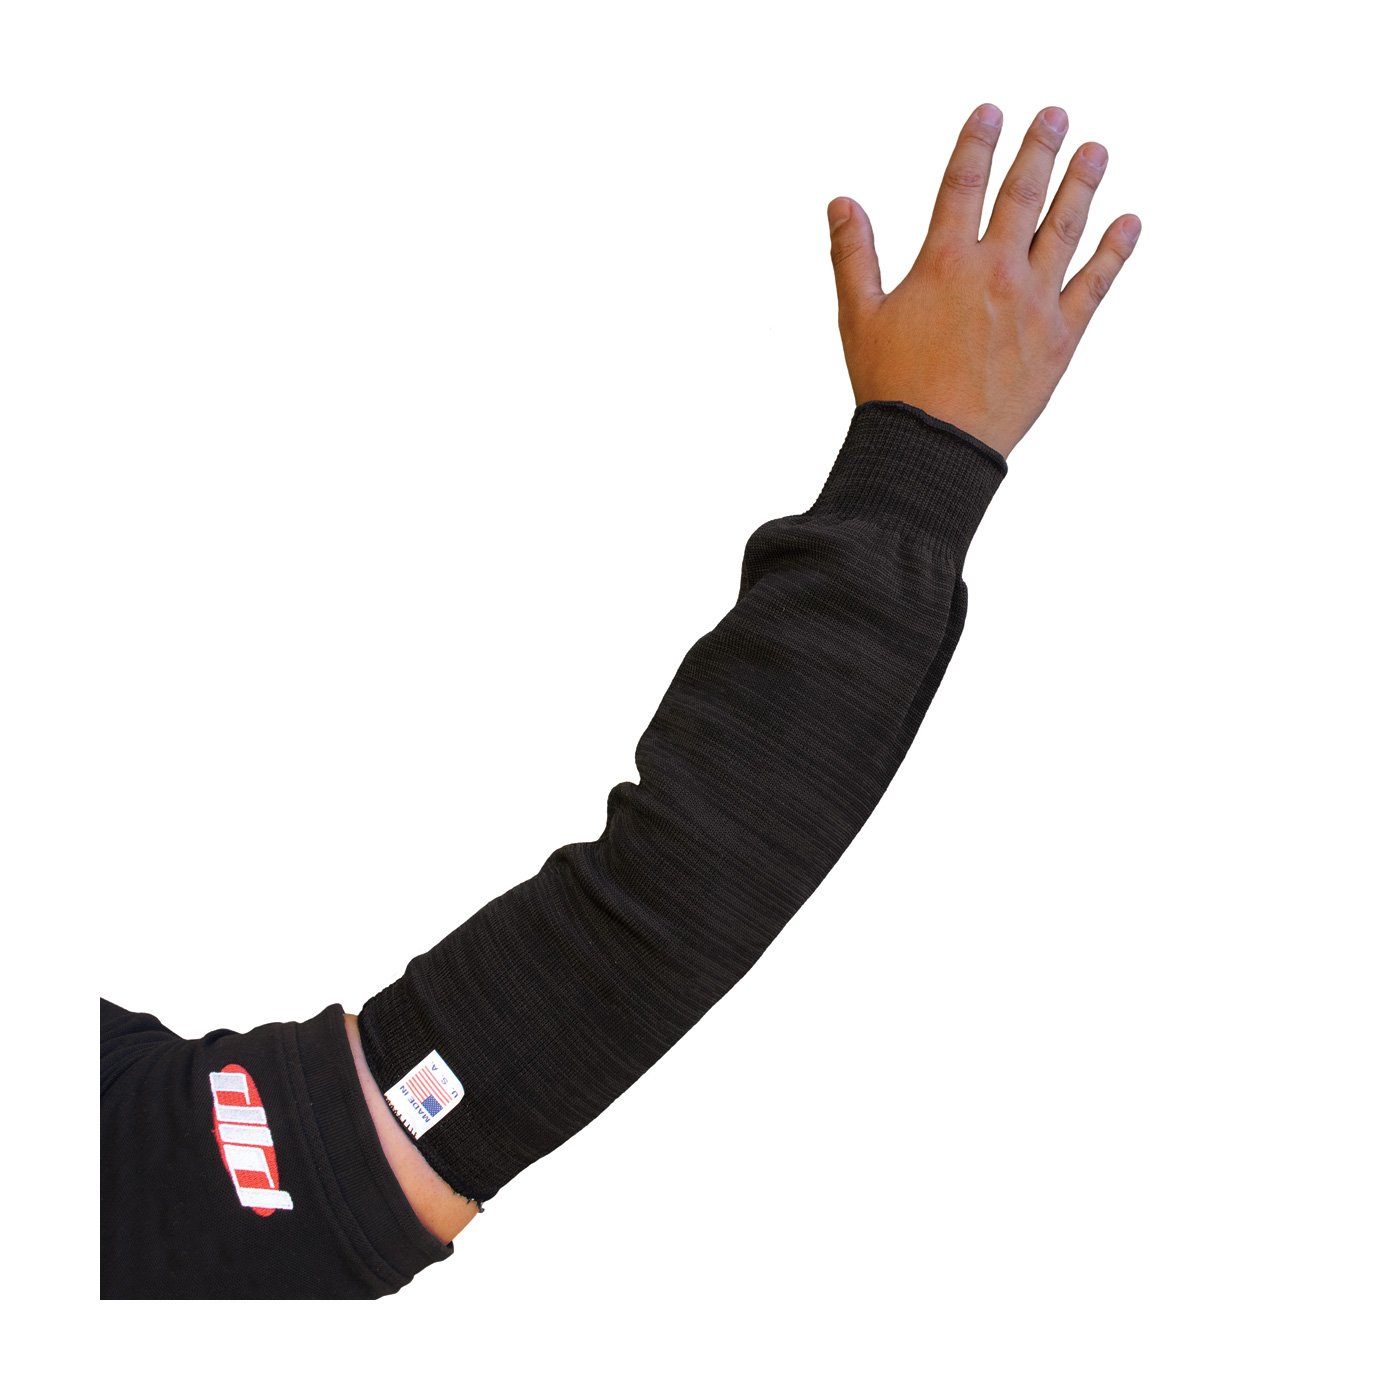 Pritex™ Sleeves with Narrow Width, Cut Level A2